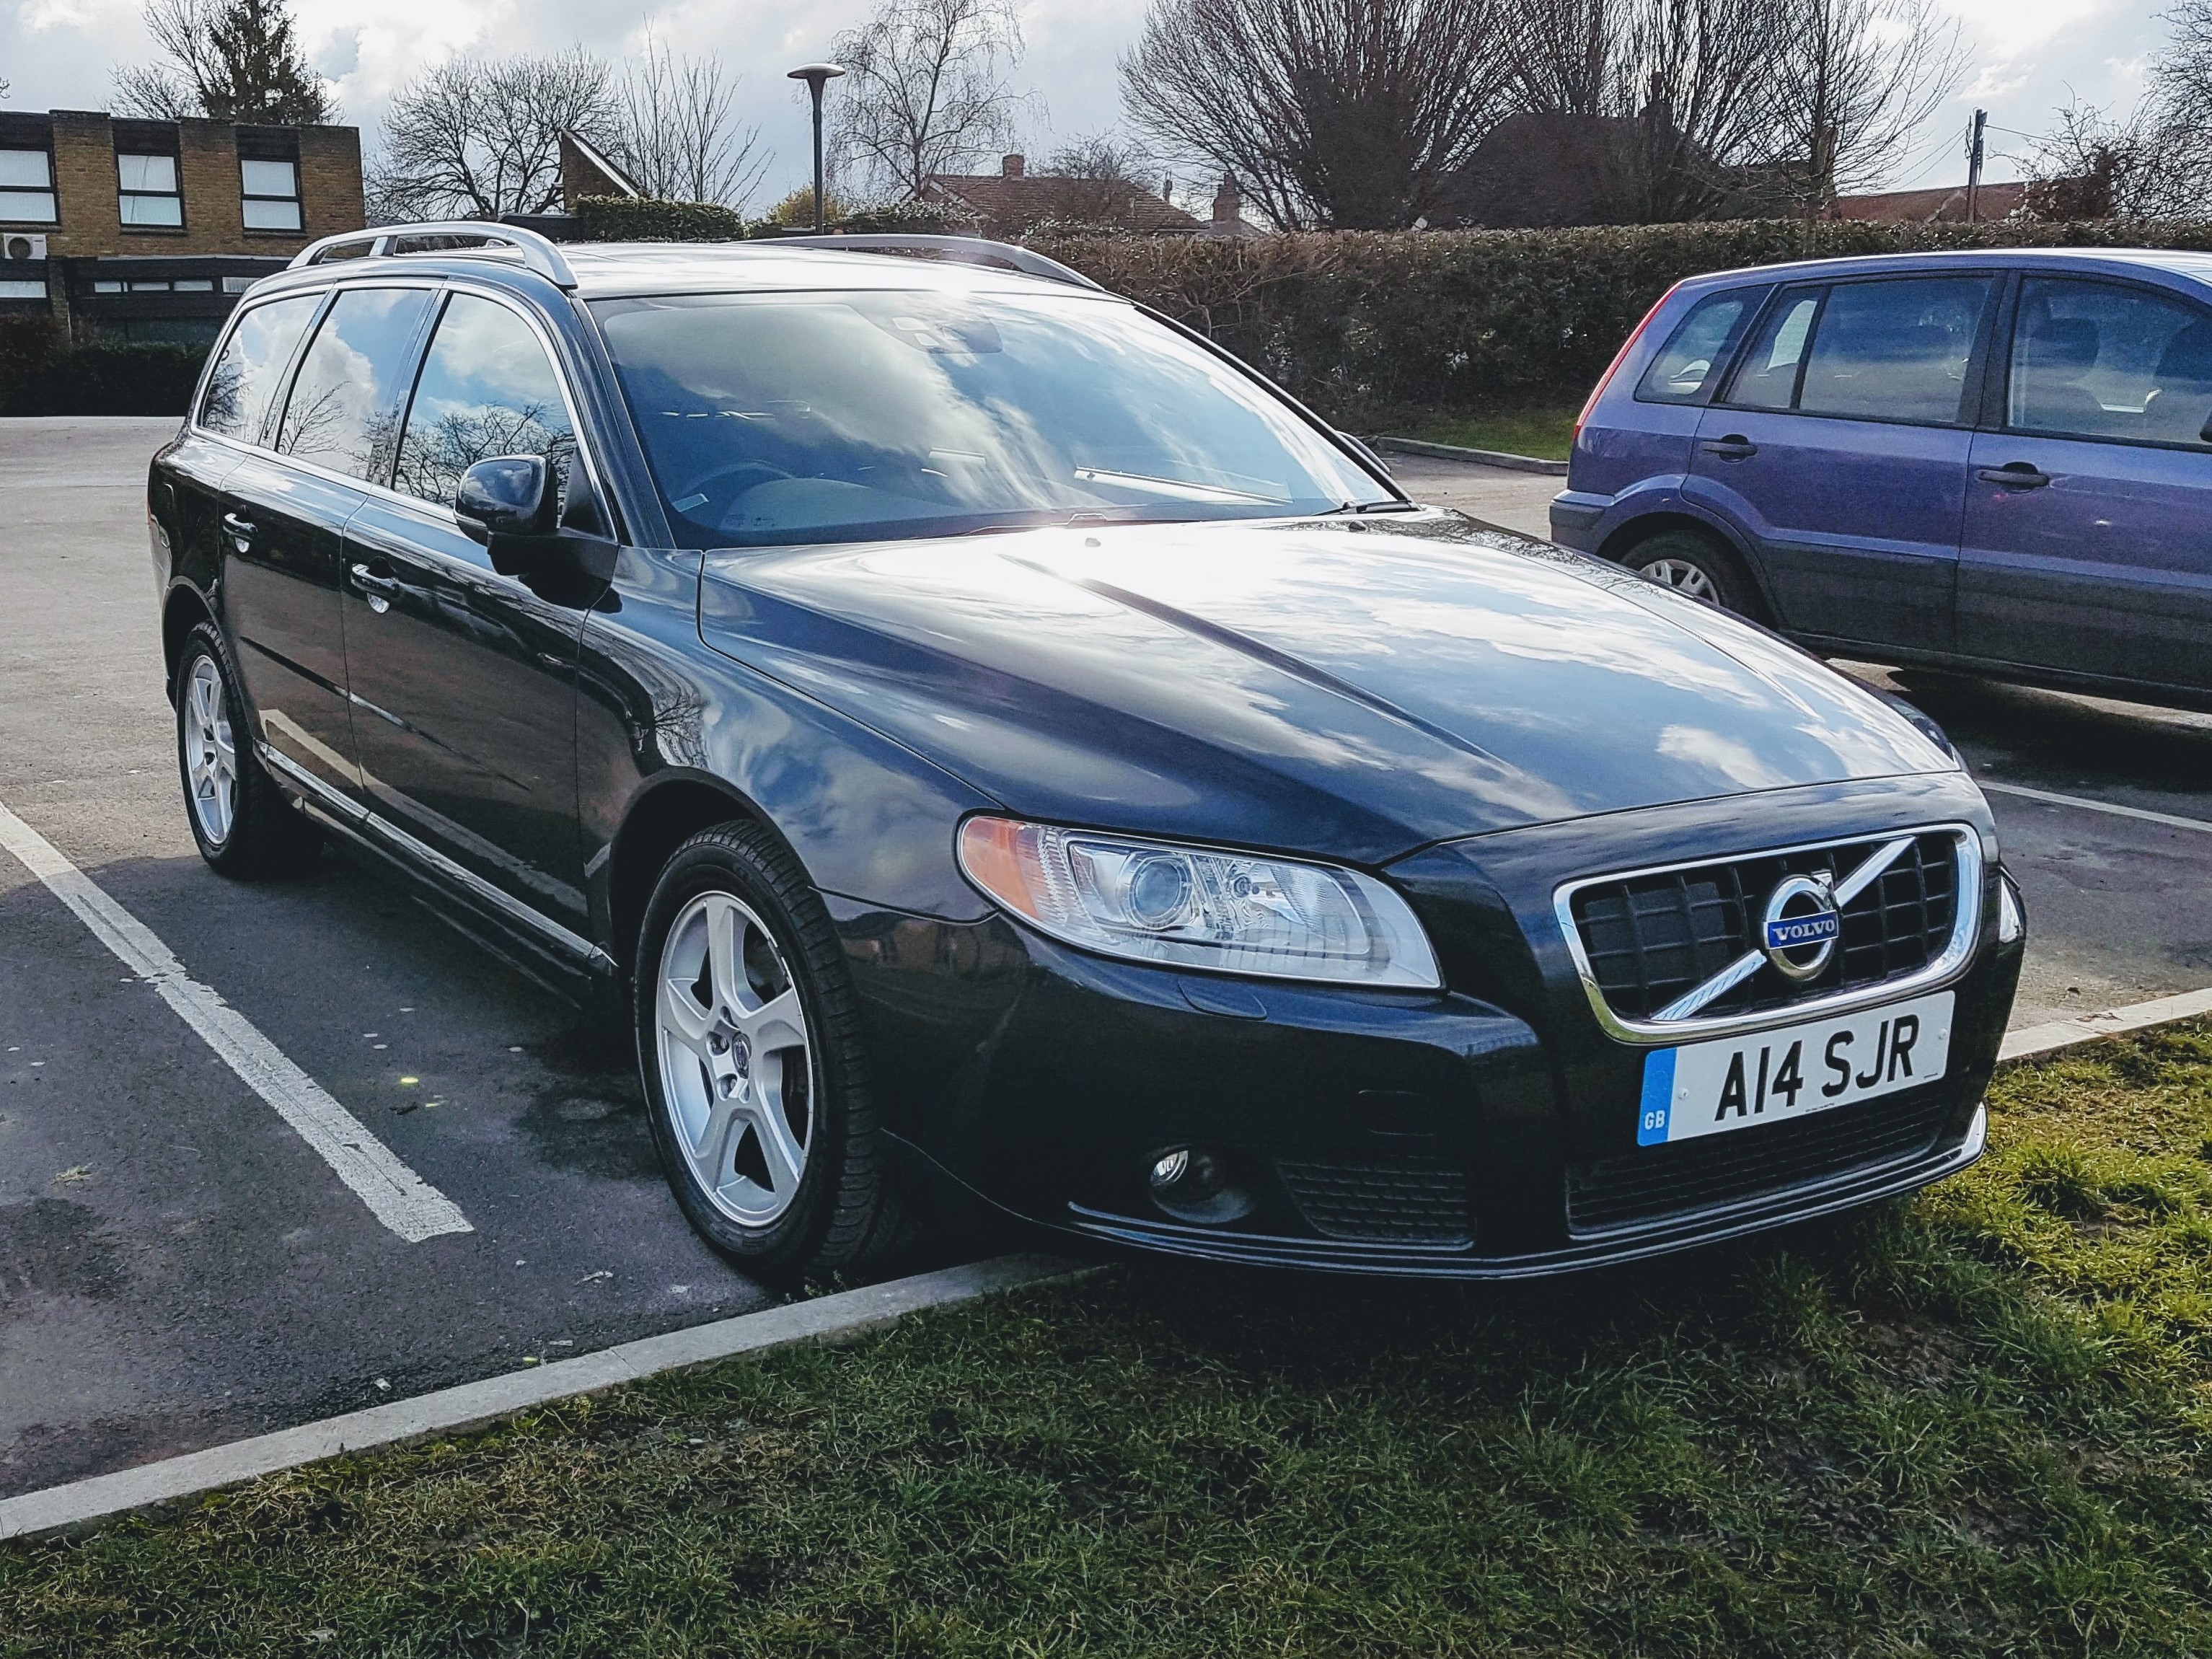 Volvo V70 Daily Driver - Page 1 - Readers' Cars - PistonHeads